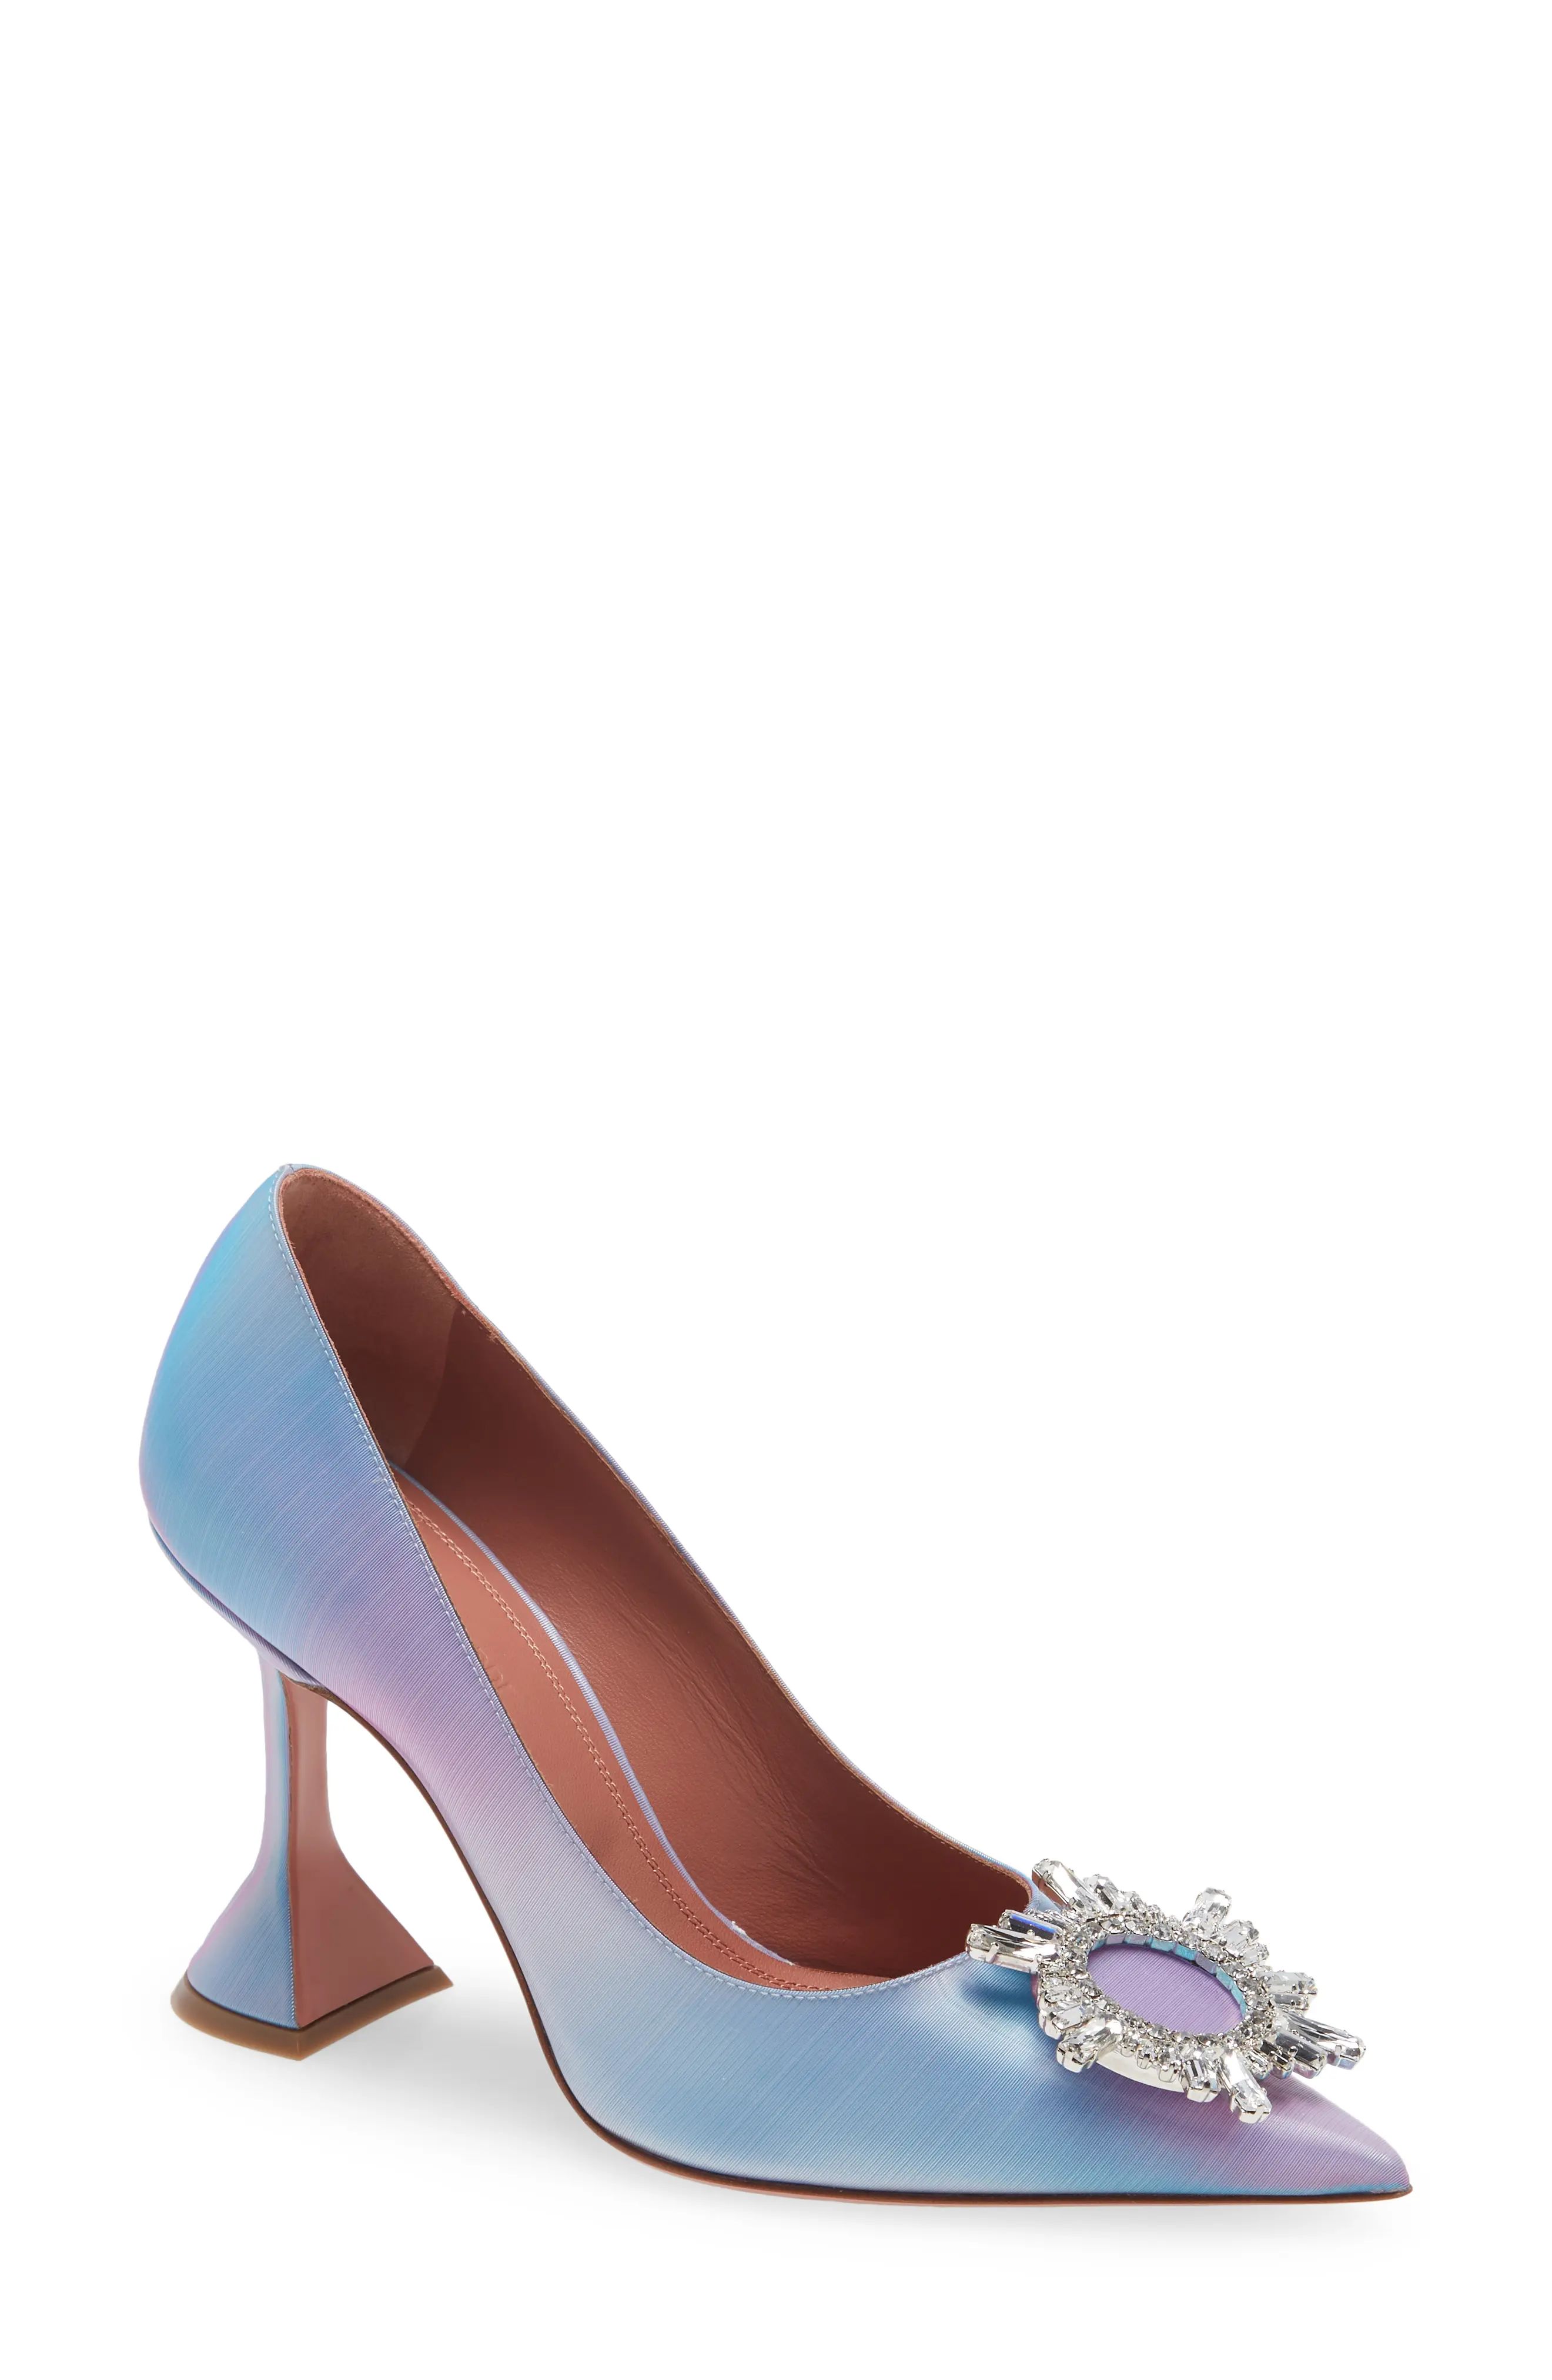 Amina Muaddi Begum Brooch Pointed Toe Pump in Shadow Fairytale at Nordstrom, Size 12Us | Nordstrom